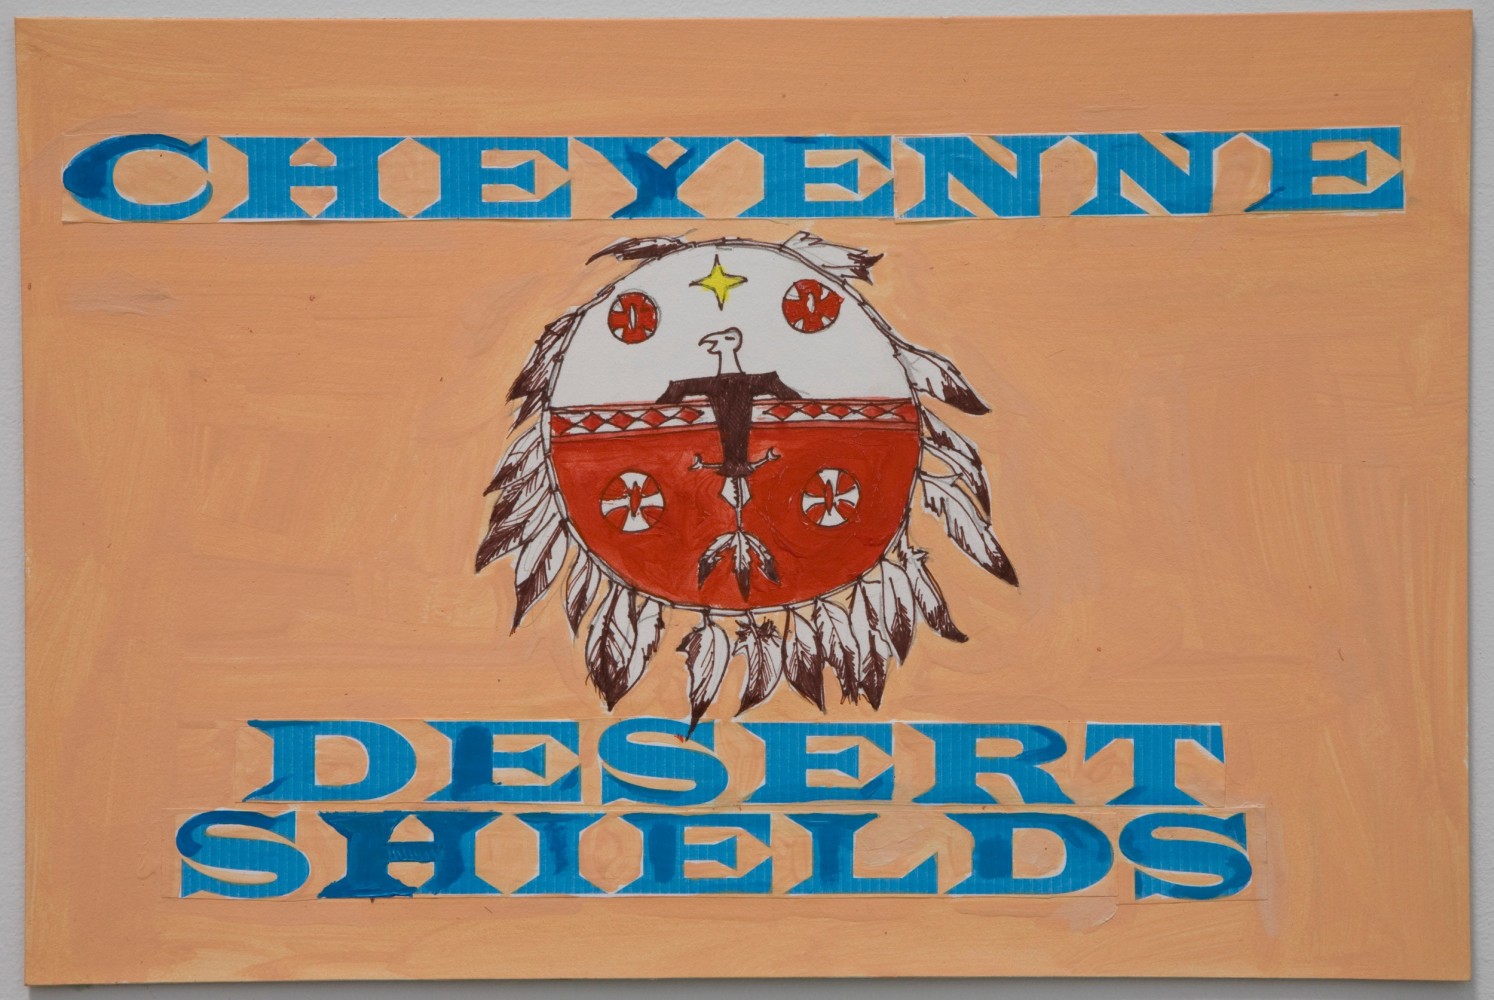 Alex Israel
High School Mural Study (Cheyenne Desert Shields), 2007
Acrylic collage on paper
11 x 15 inches
Courtesy of the artist